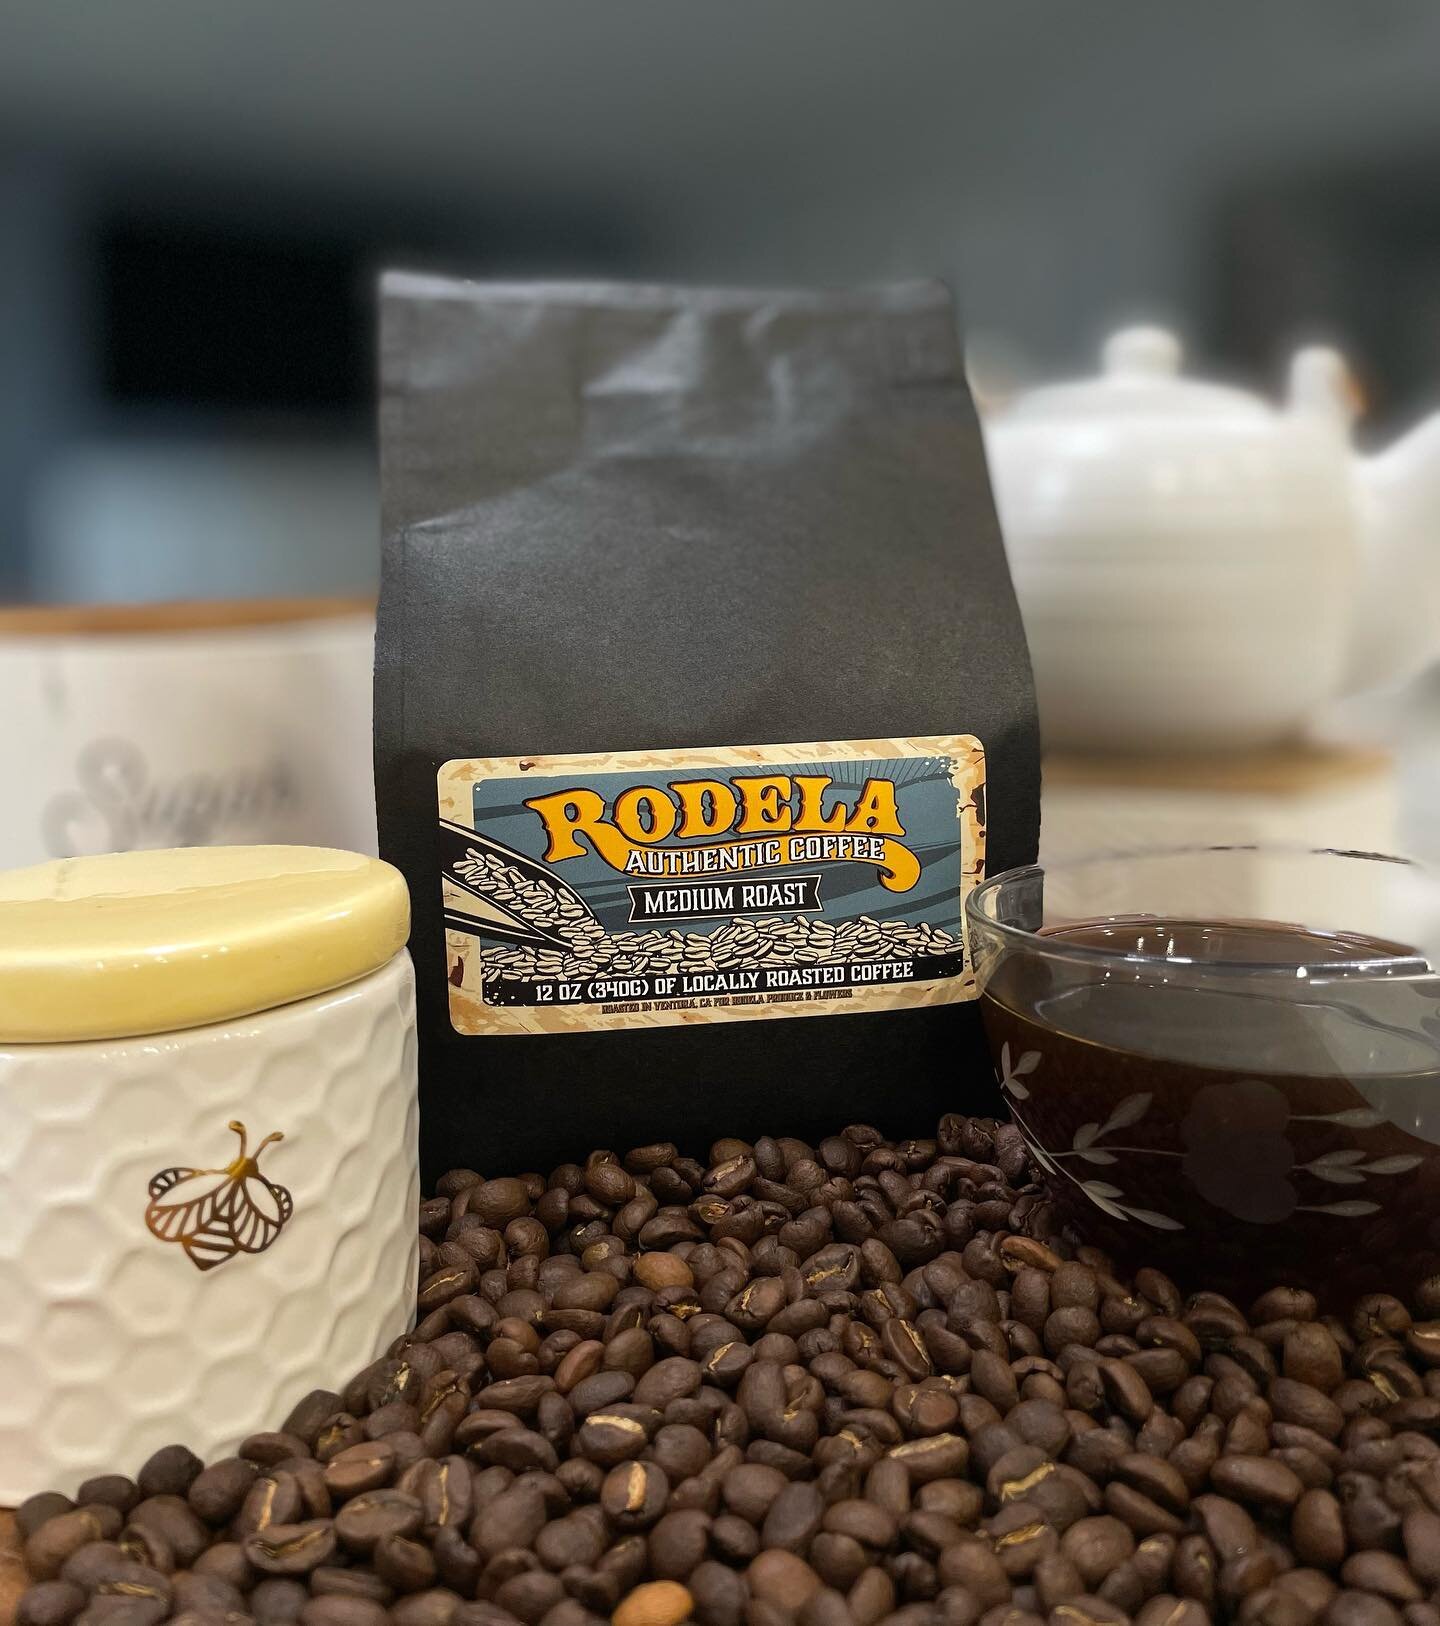 Locally Roasted Coffee Now Available‼️Harvested from Central and South America, then roasted here in Ventura CA☕️
.
.
.
.
.
#coffee #coffeebeans #local #ventura #farmersmarket #explorepage #coffeetime #locallyroasted #805